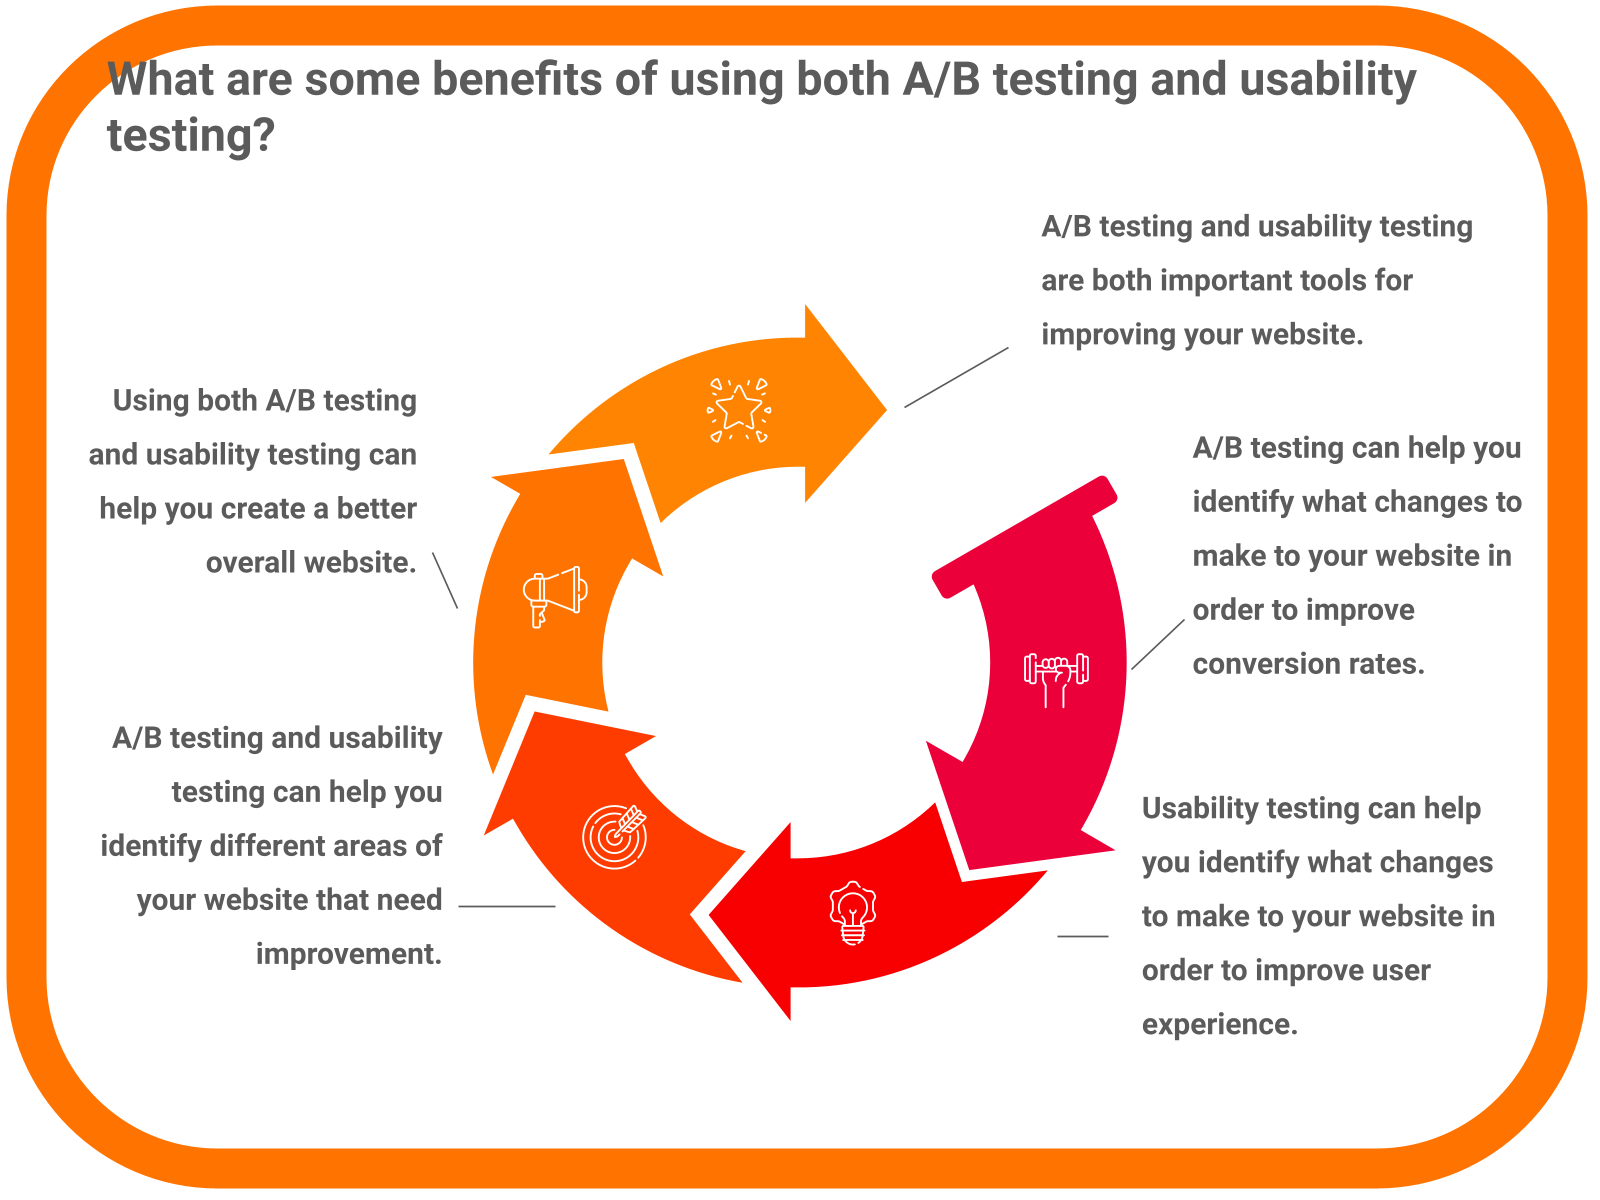 What are some benefits of using both A/B testing and usability testing?